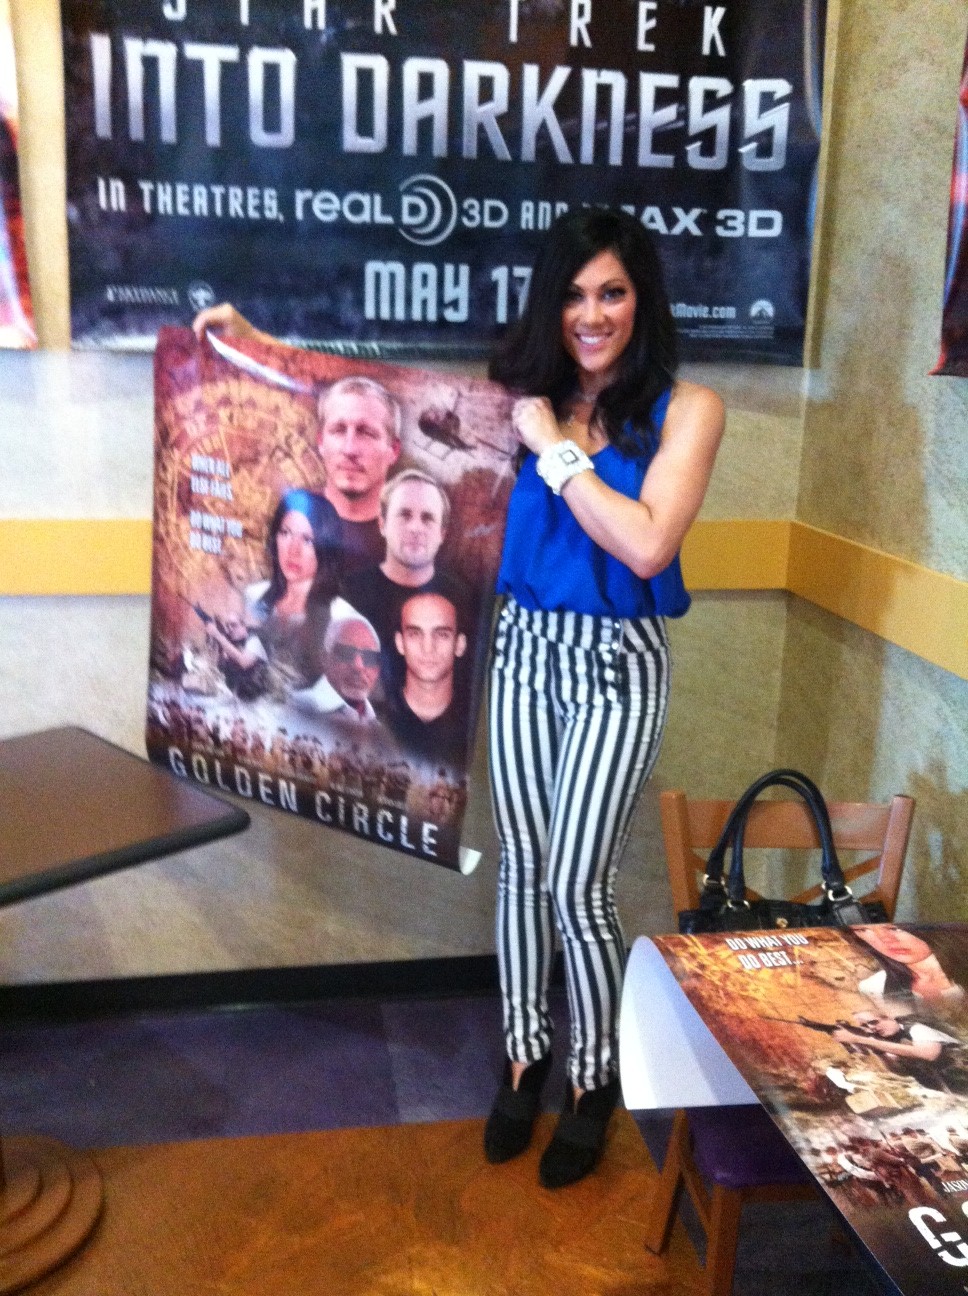 Poster Signing at Movie Release; Golden Circle